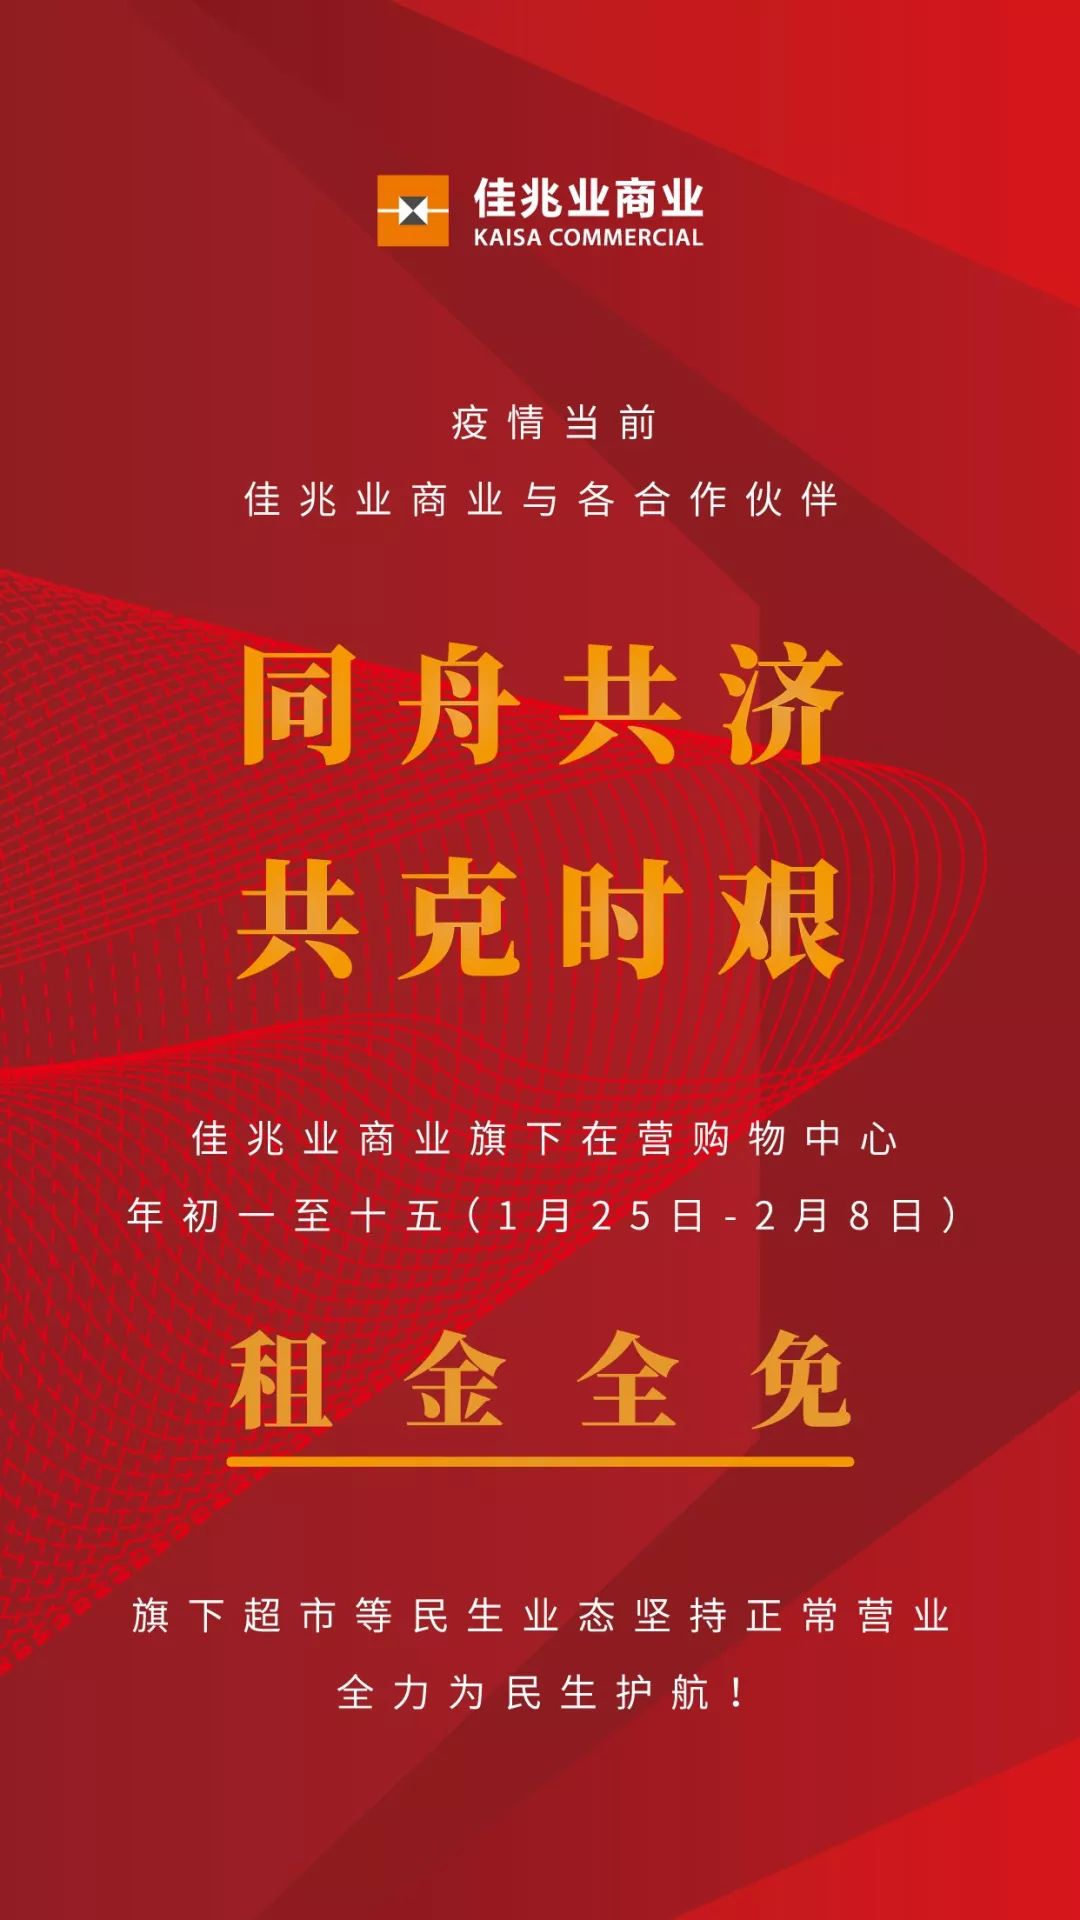 Jia Zhaoye Commercial and merchants share the same boat and rent is free from the first to the fifteenth of the beginning of the year